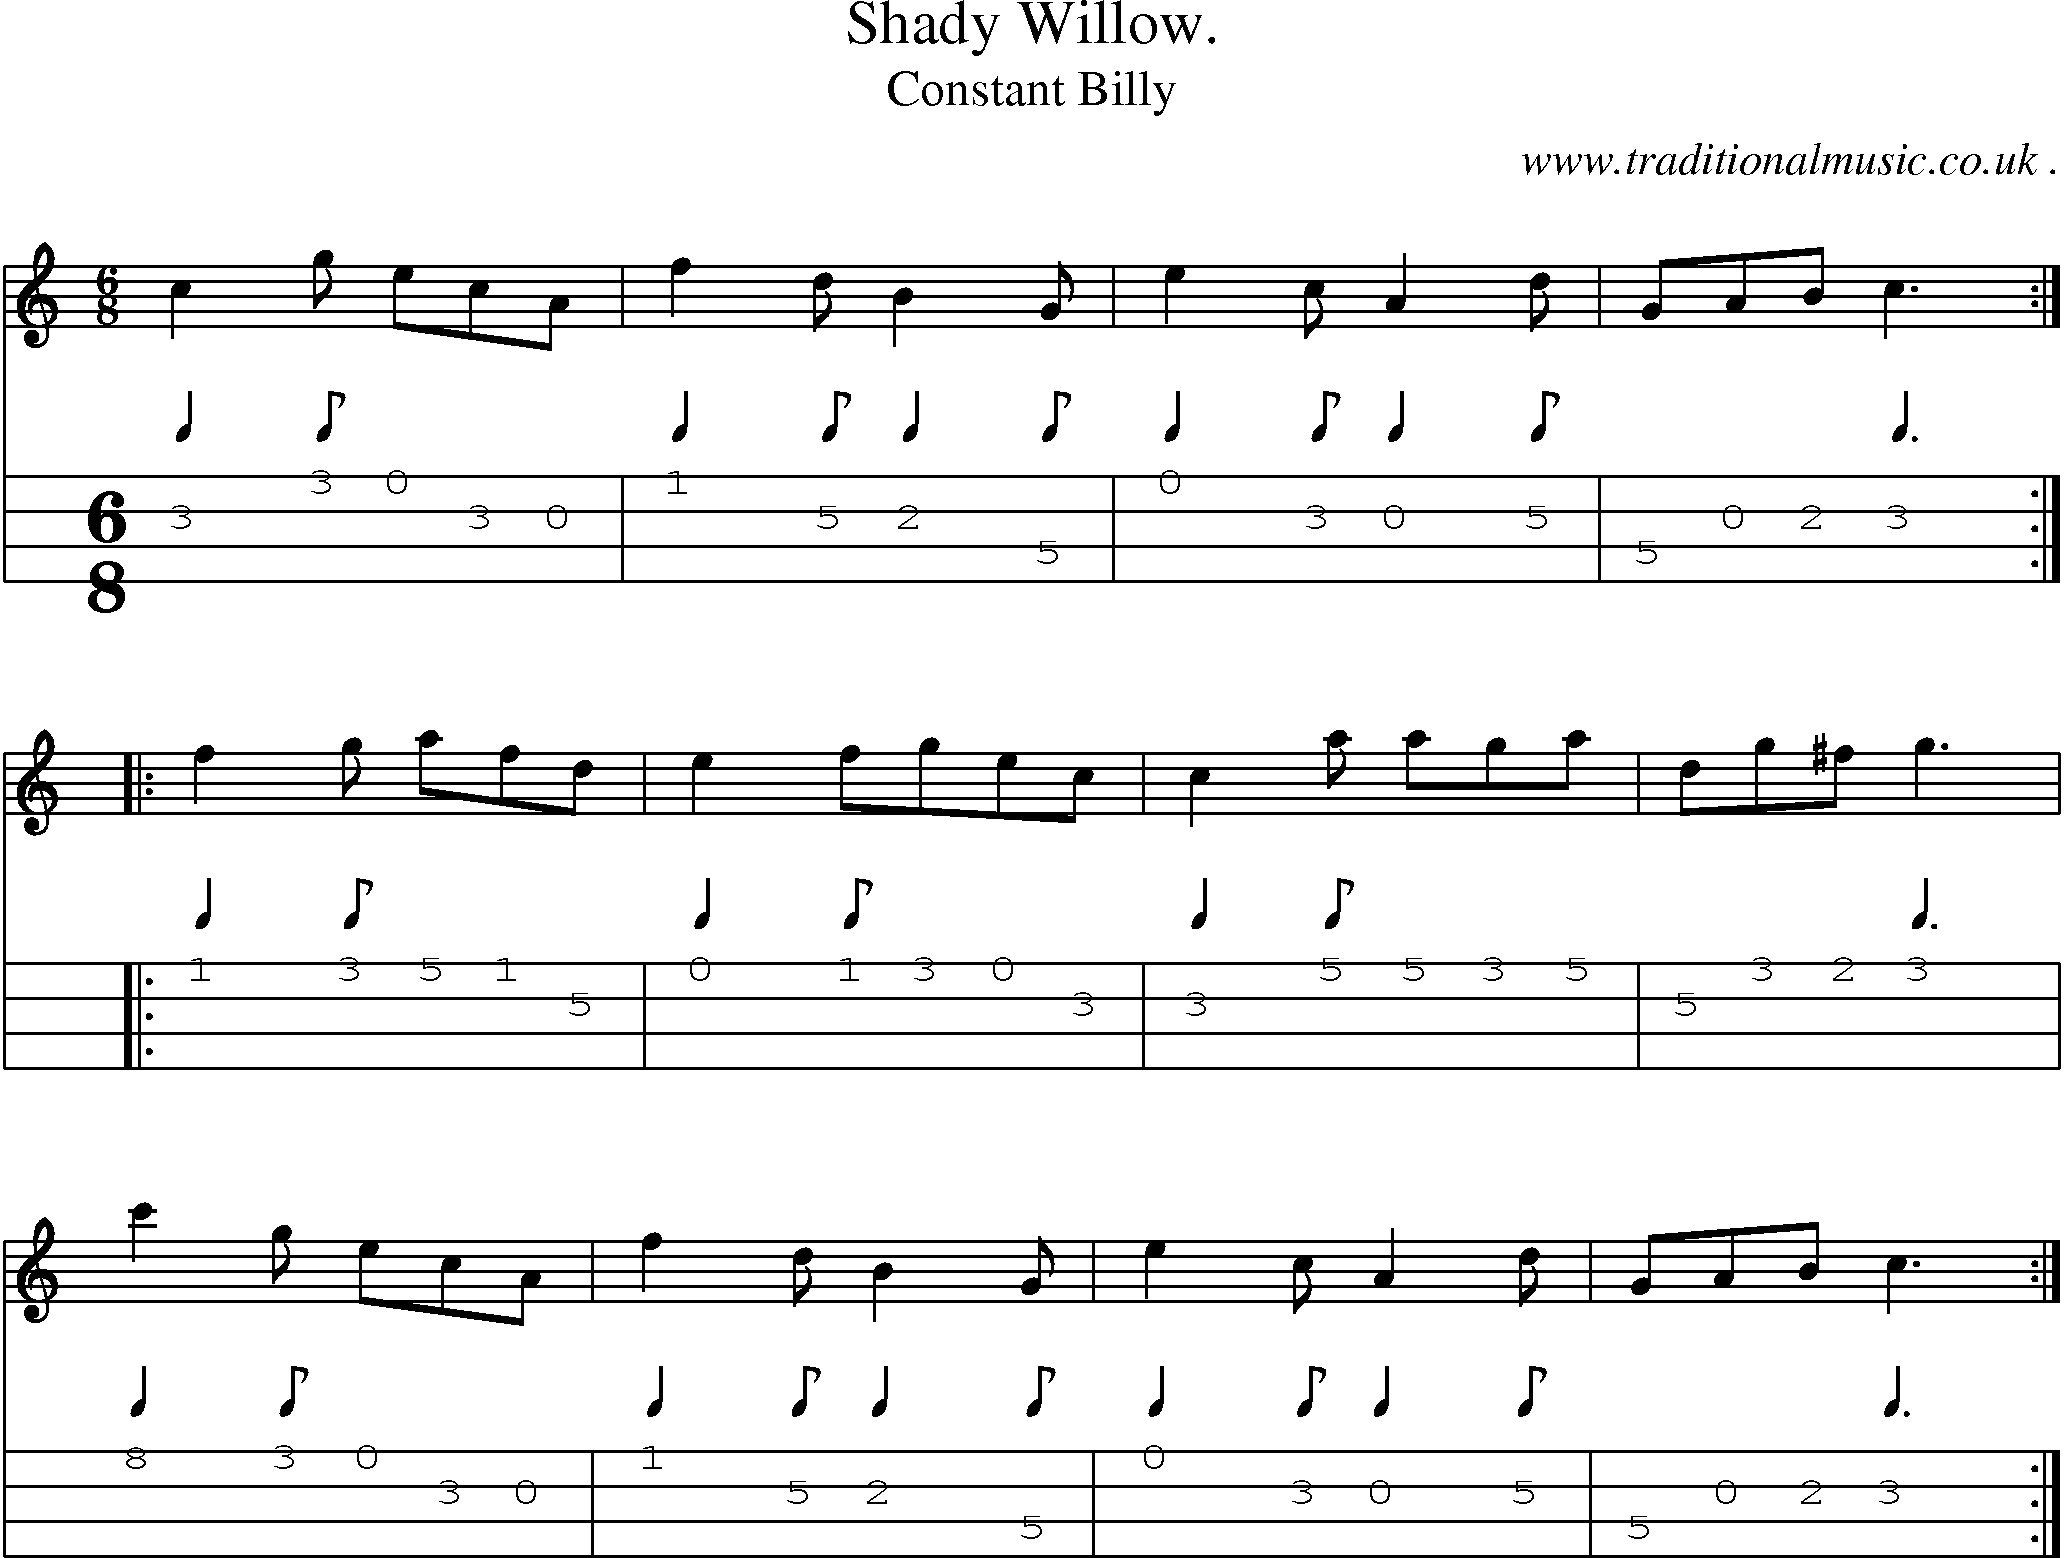 Sheet-Music and Mandolin Tabs for Shady Willow